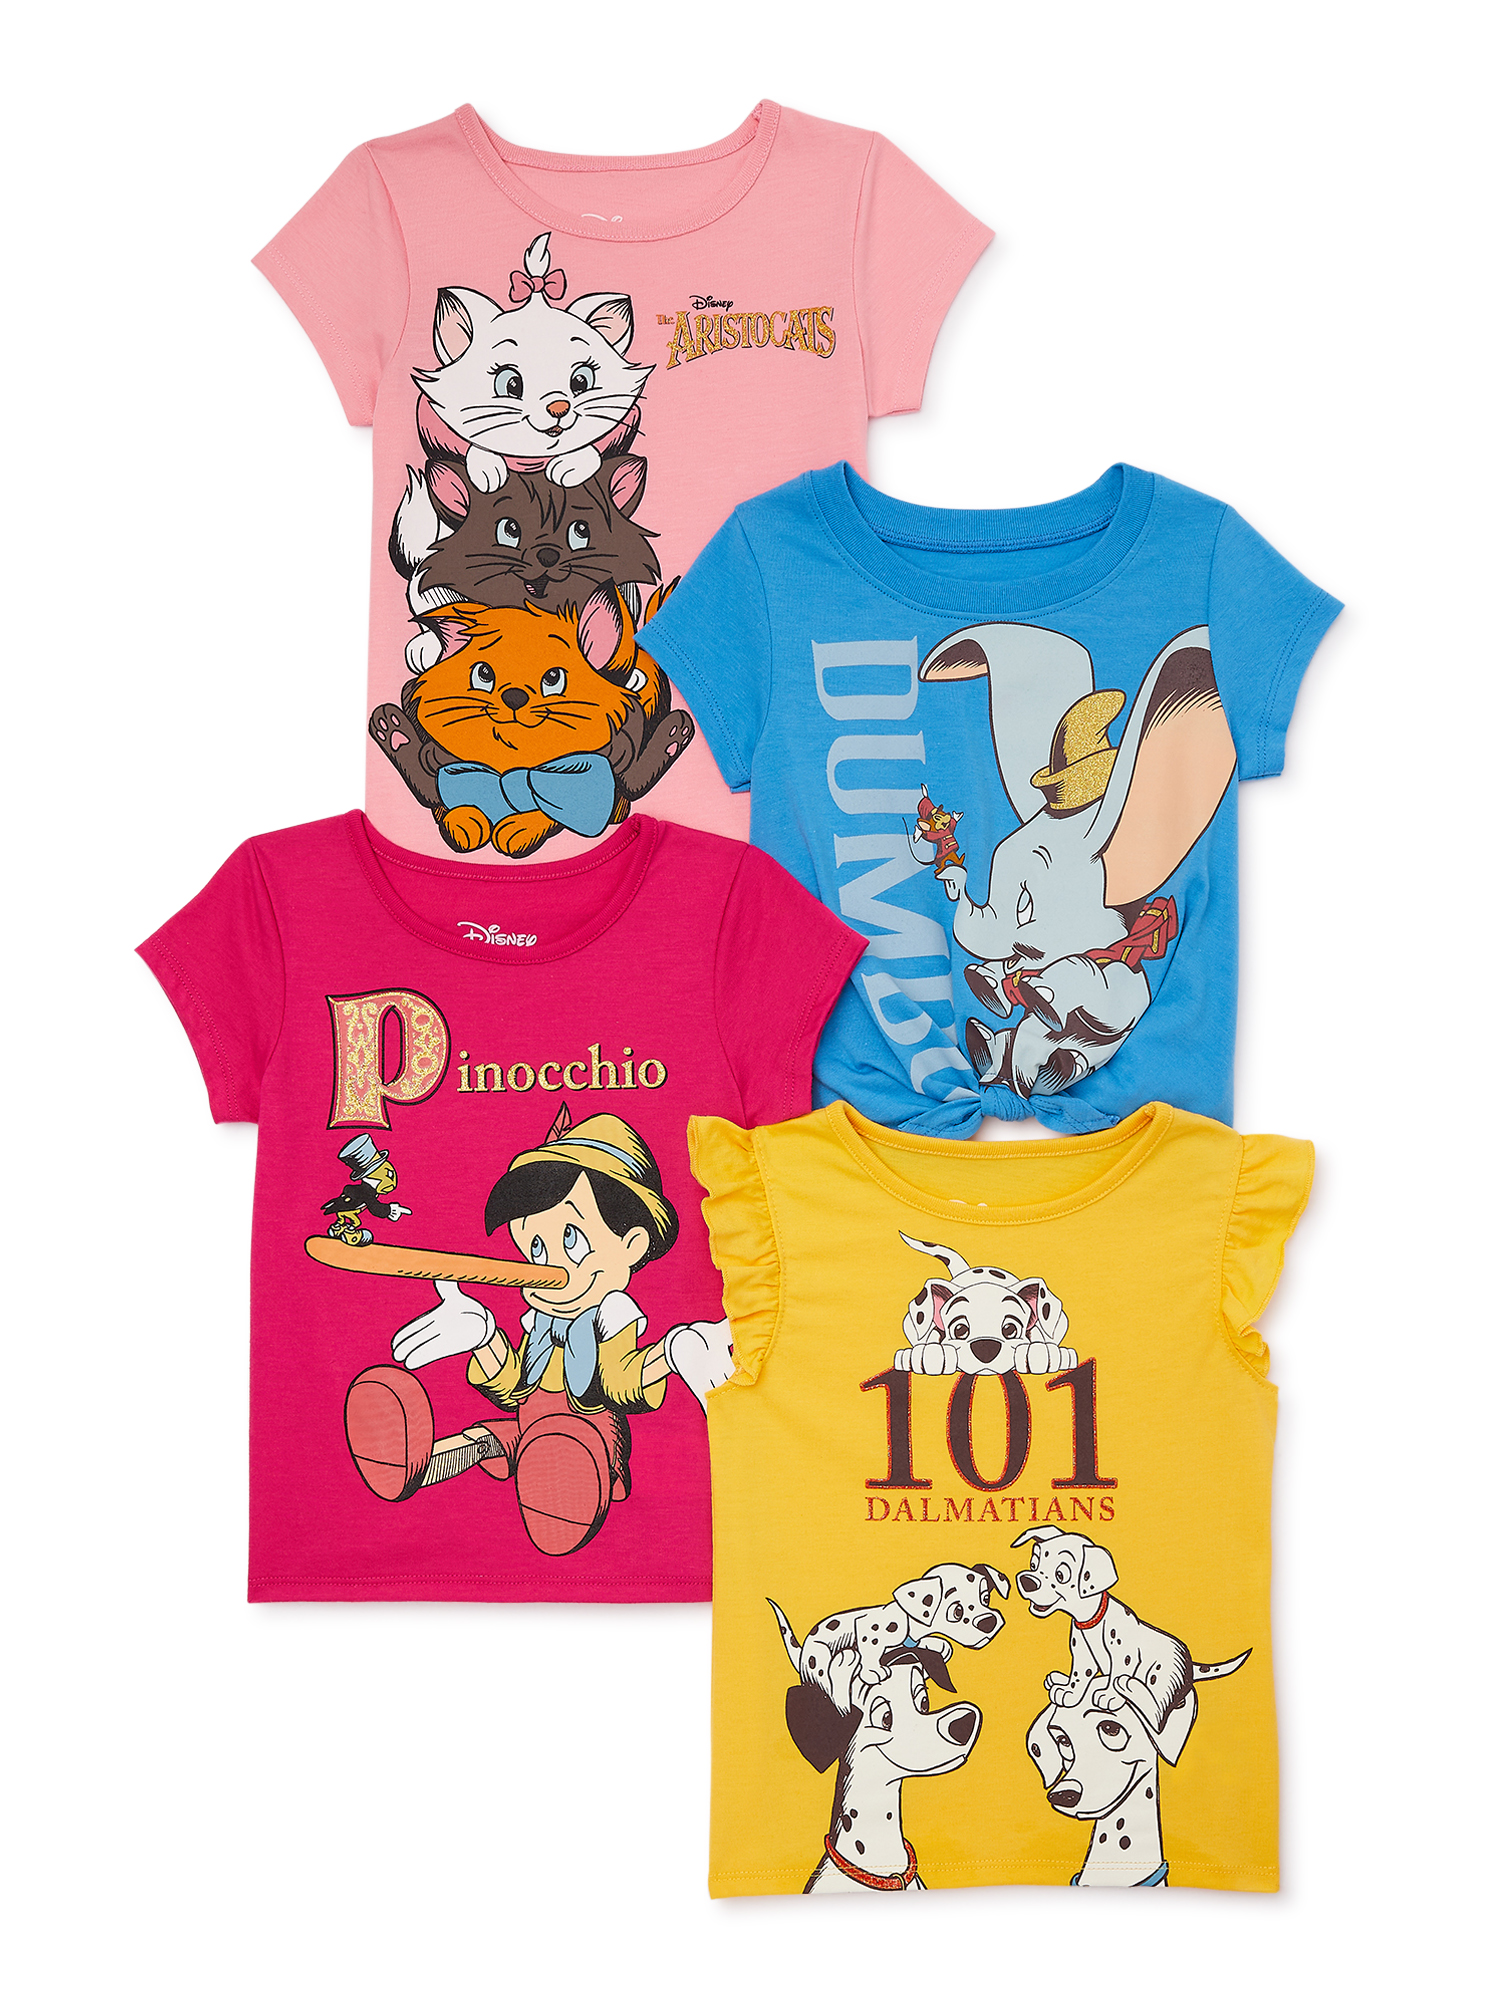 Disney Classics Toddler Girl Graphic Print Fashion T-Shirts, 4-Pack, Sizes 2T-5T - image 1 of 13